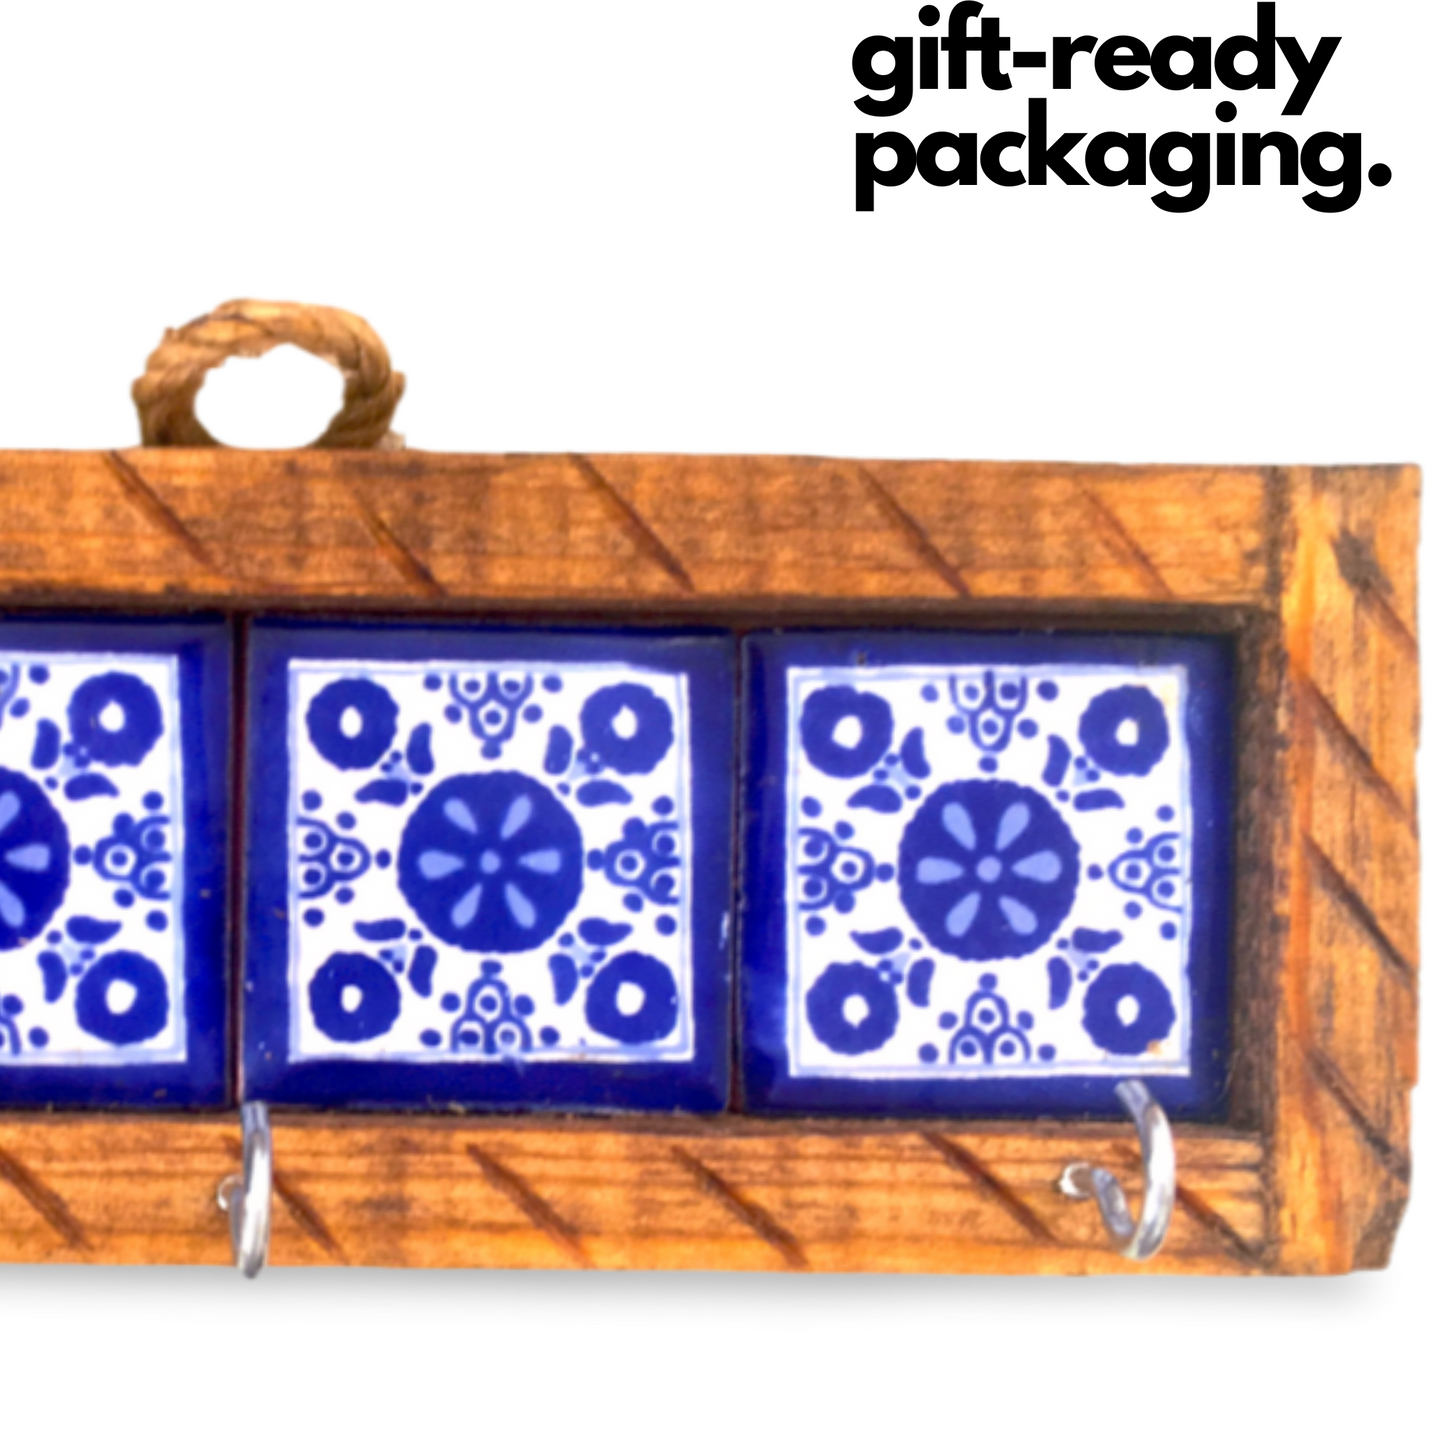 Mexican style key holder with blue and white Talavera tiles, handcrafted by Mexican artisans, perfect for organizing keys and home decor.